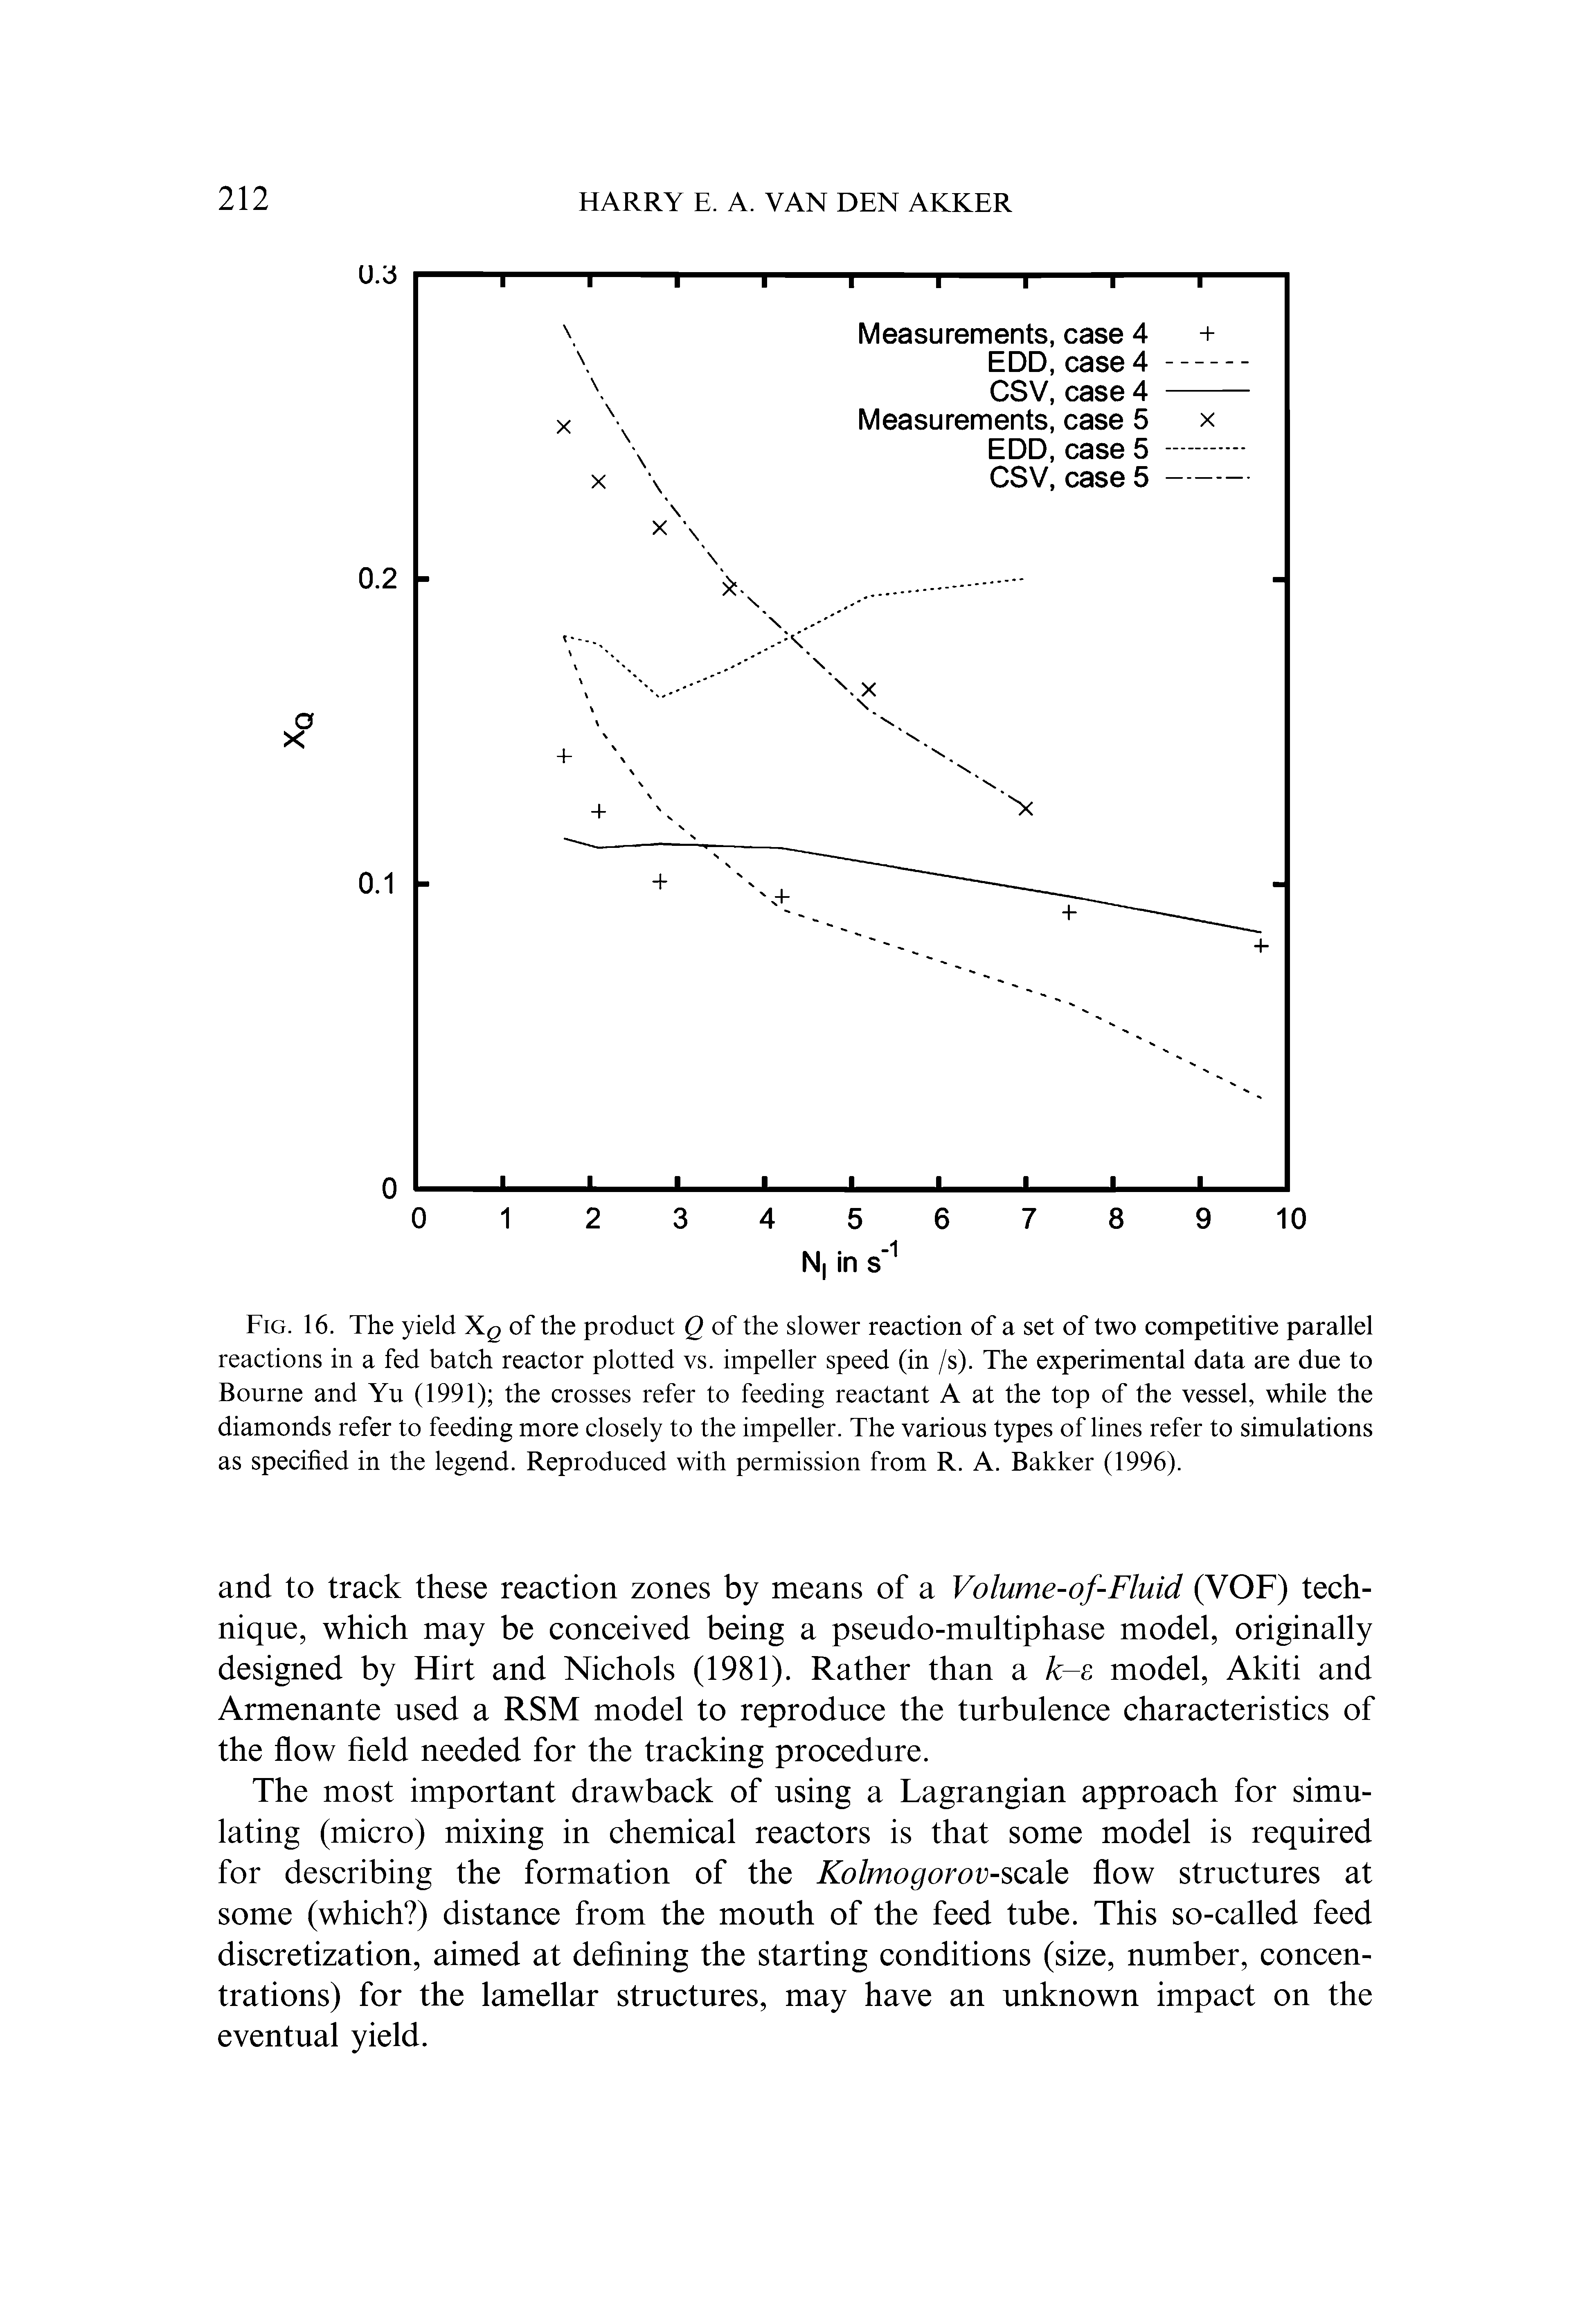 Fig. 16. The yield Xg of the product Q of the slower reaction of a set of two competitive parallel reactions in a fed batch reactor plotted vs. impeller speed (in /s). The experimental data are due to Bourne and Yu (1991) the crosses refer to feeding reactant A at the top of the vessel, while the diamonds refer to feeding more closely to the impeller. The various types of lines refer to simulations as specified in the legend. Reproduced with permission from R. A. Bakker (1996).